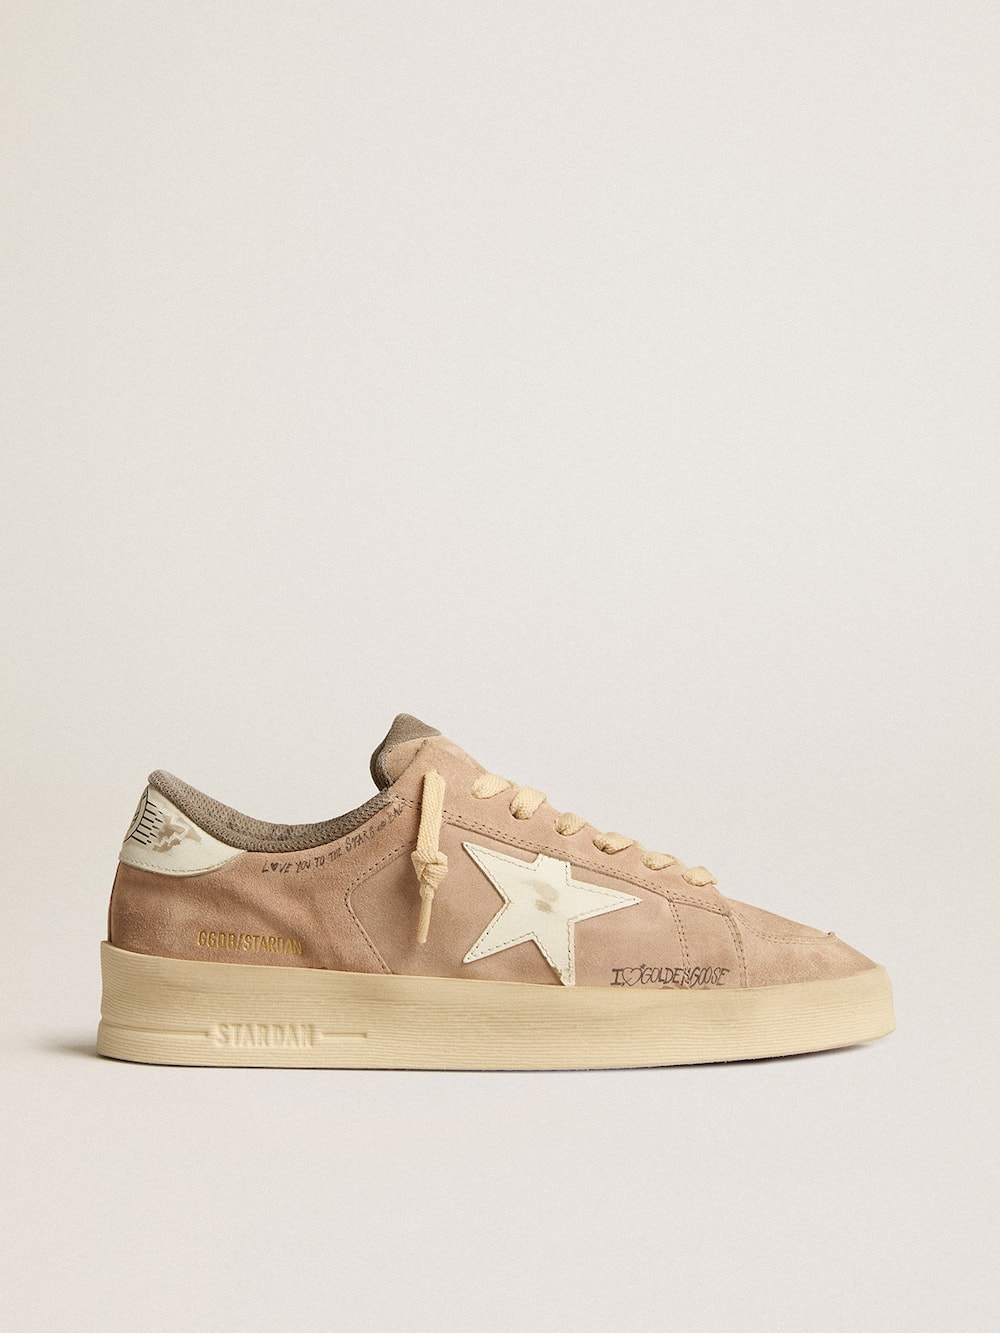 Golden Goose - Stardan in old rose suede with white leather star and heel tab in 